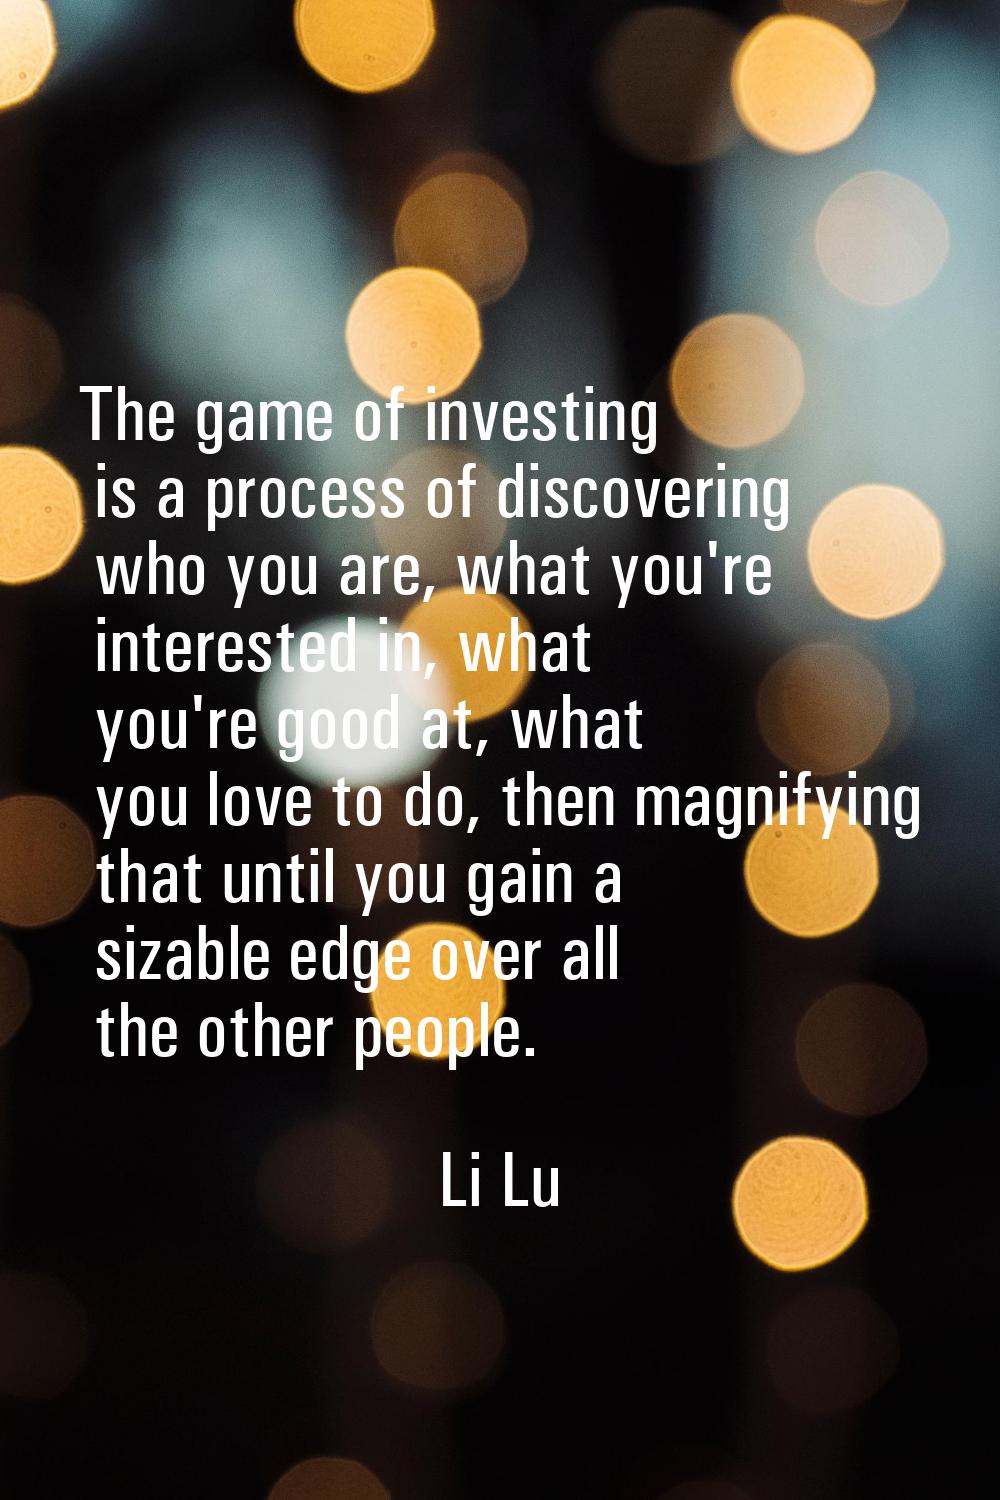 The game of investing is a process of discovering who you are, what you're interested in, what you'